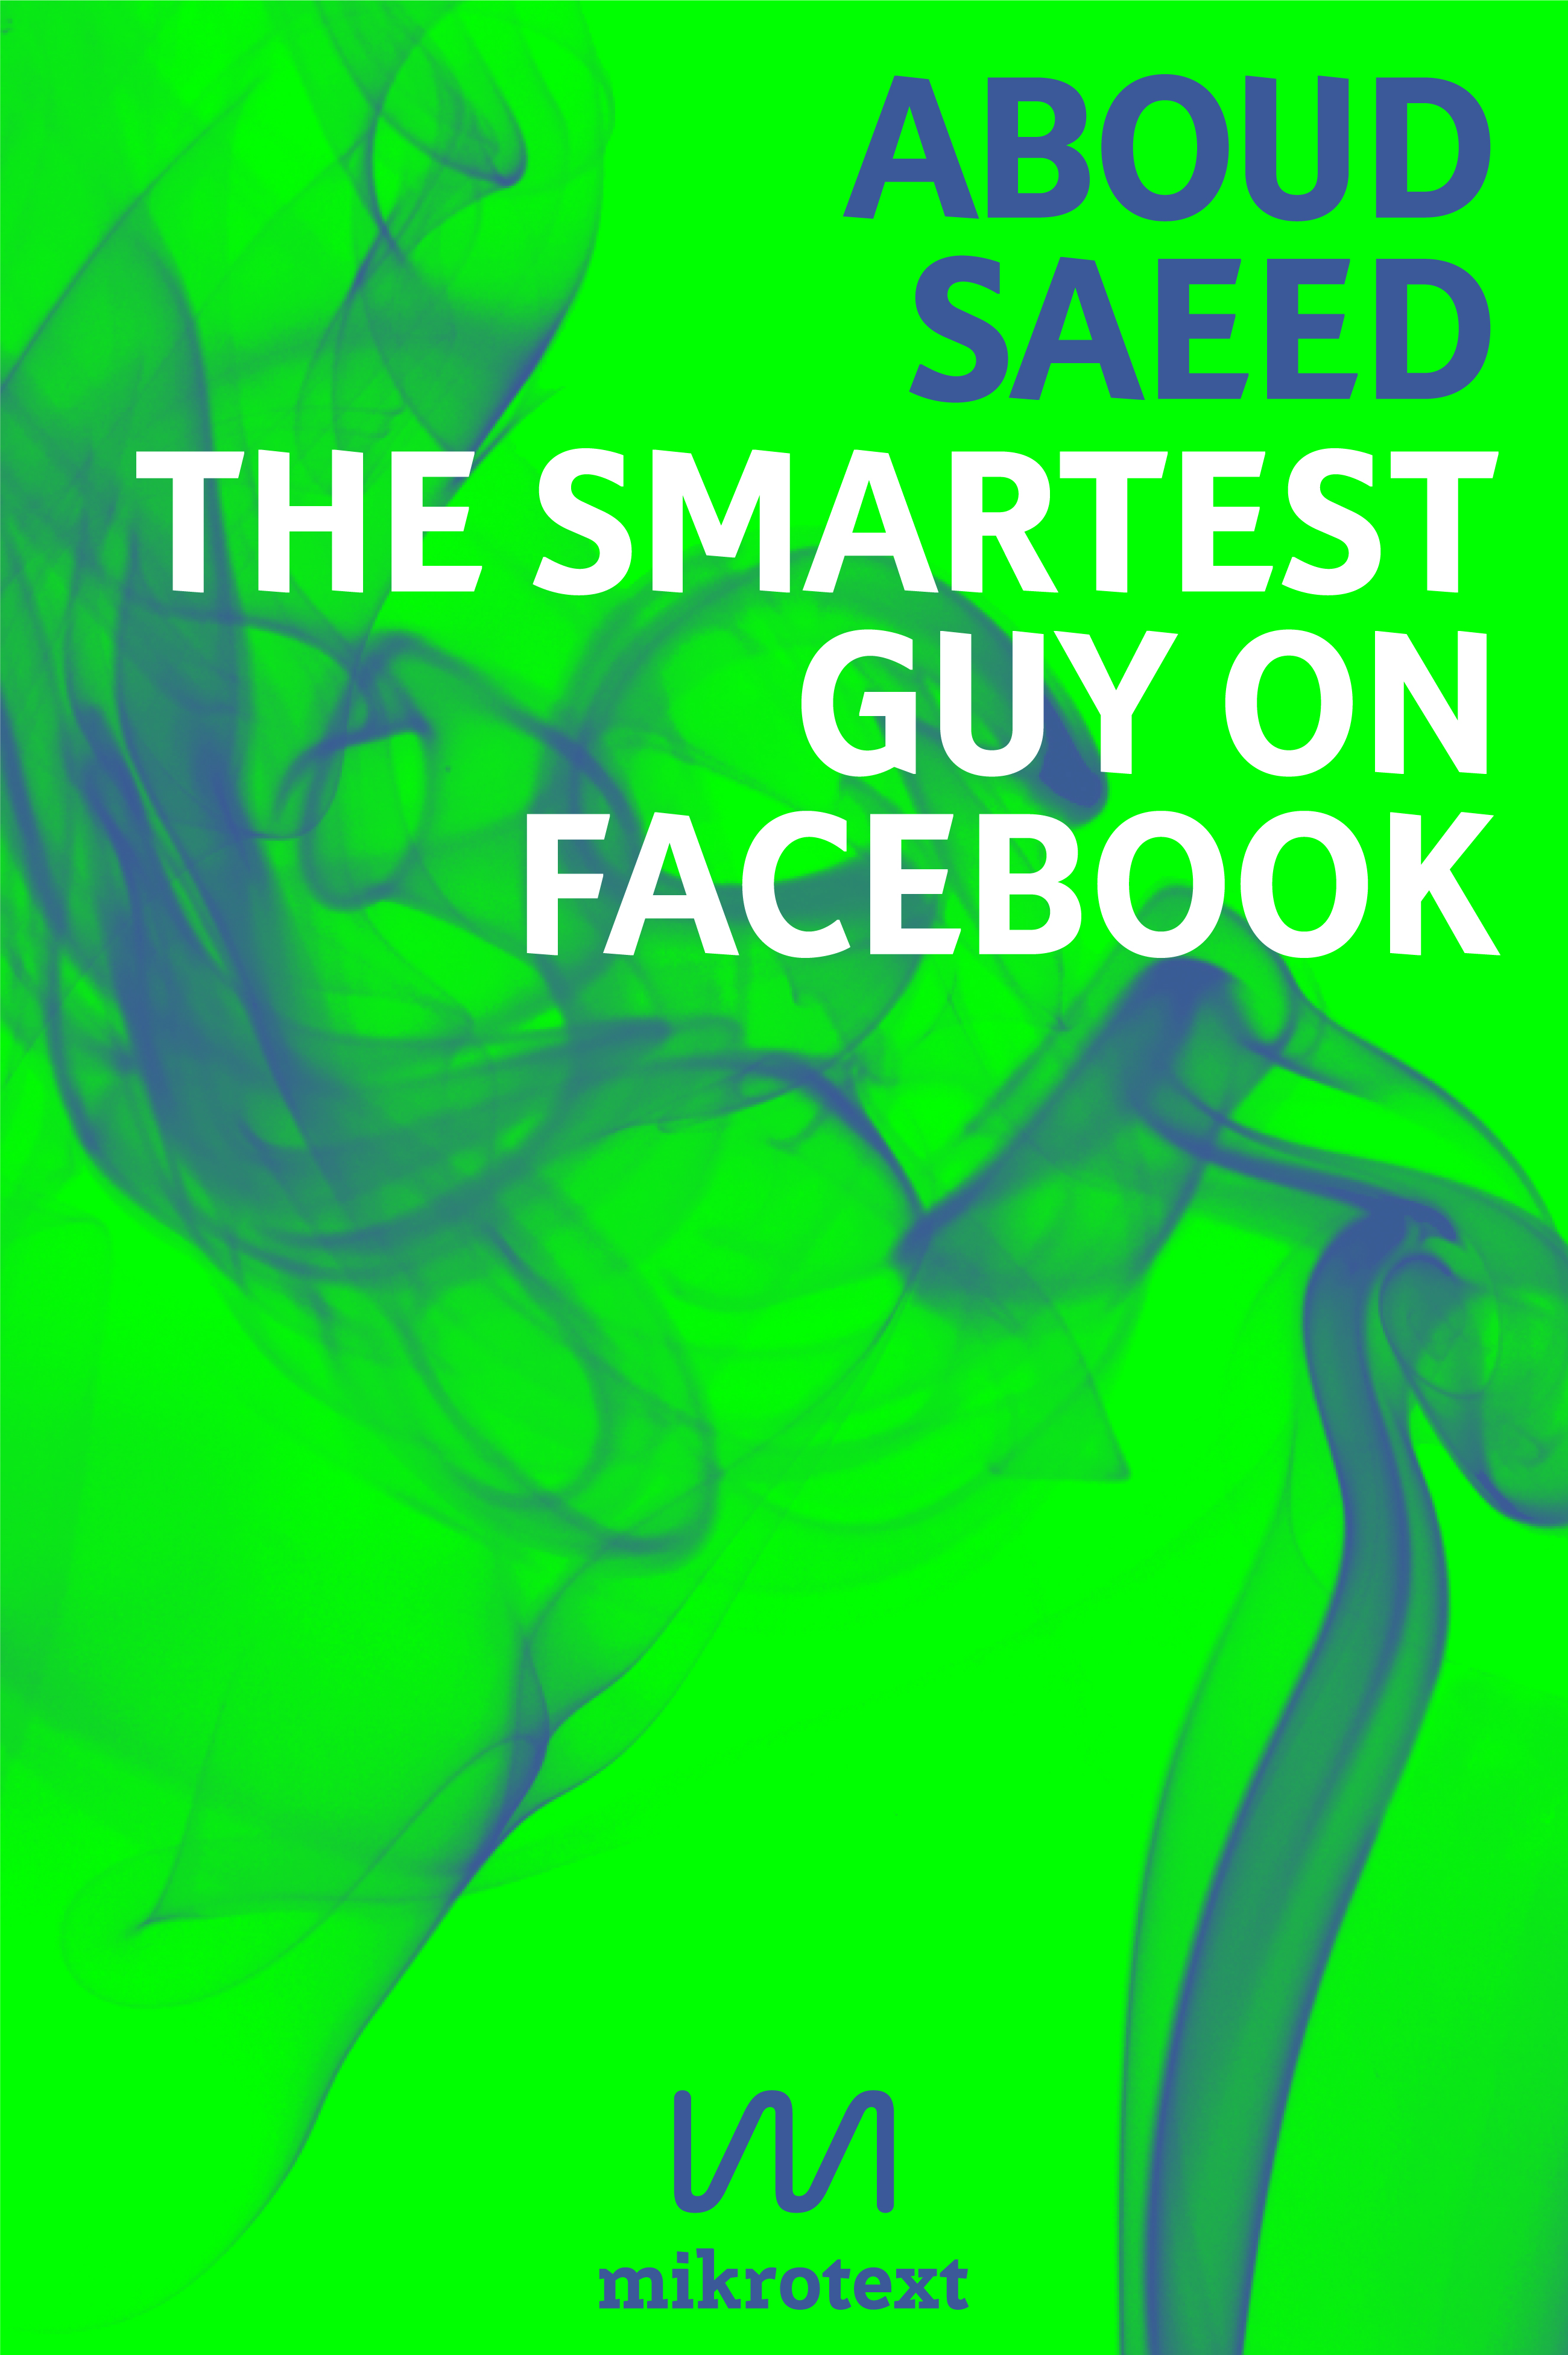 Cover of Aboud Saeed's book "The smartest guy on Facebook" (source: mikrotext)